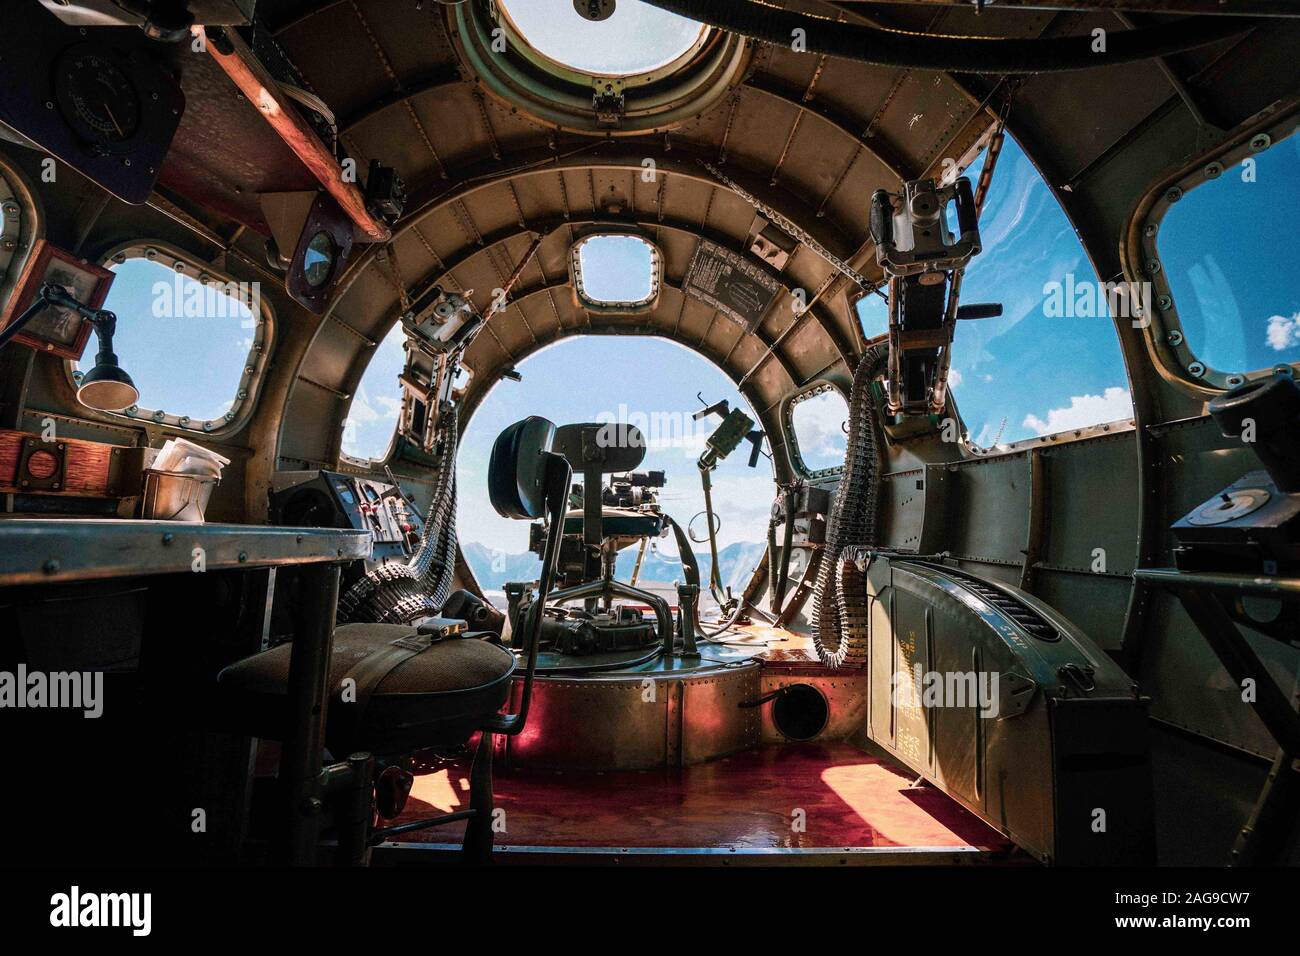 The Interior Of A B 17 Bomber Plane From Wwii In An Airbase